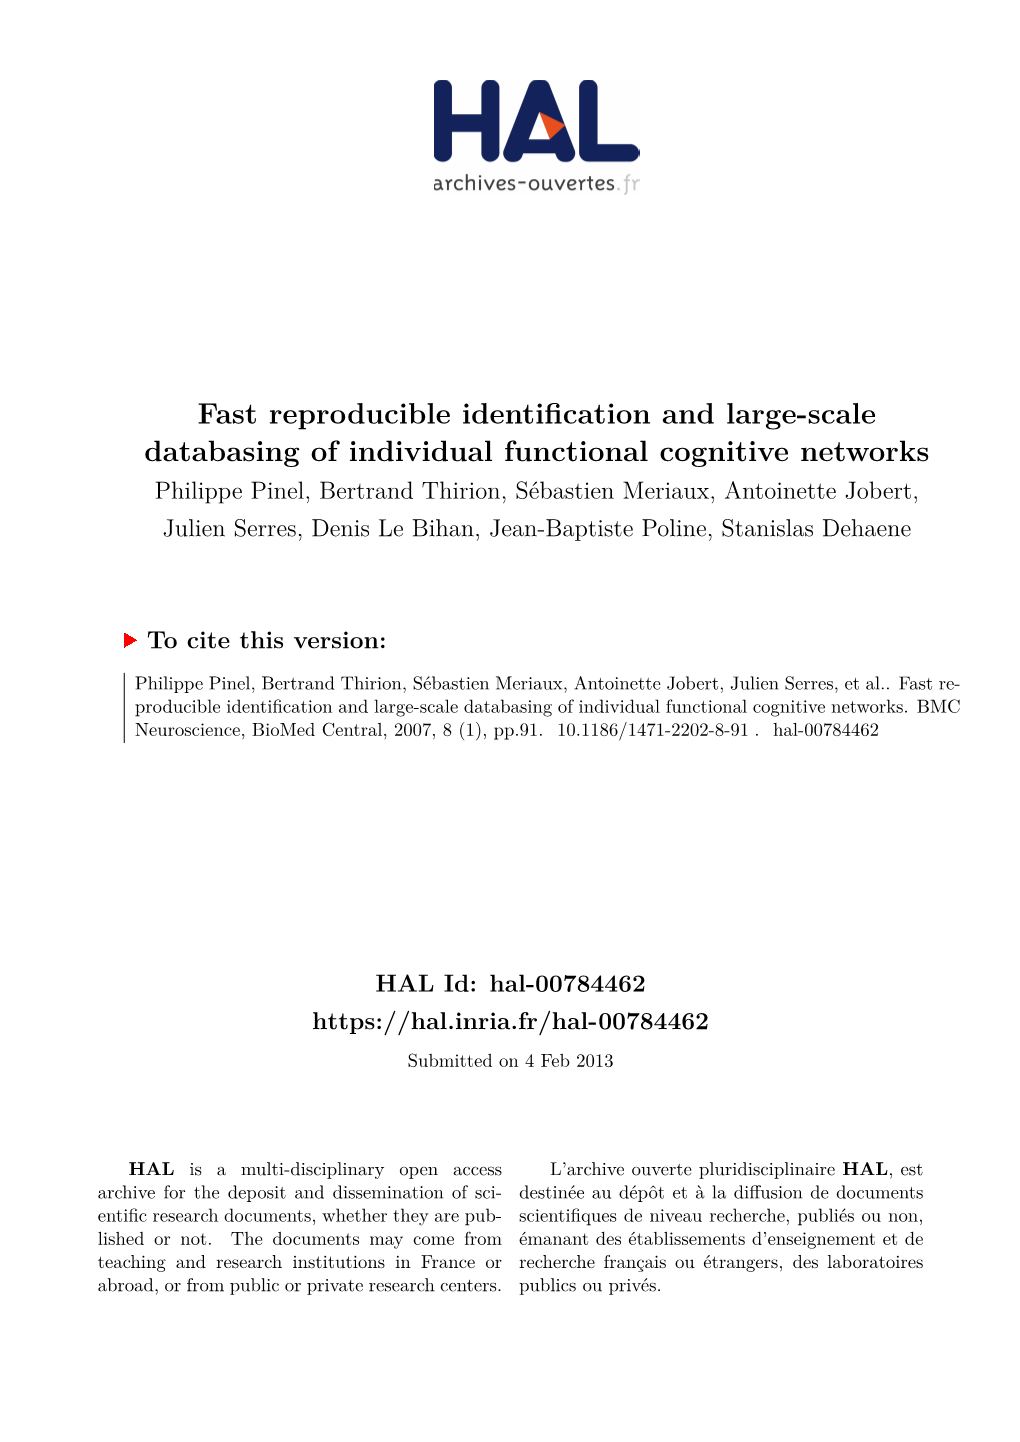 Fast Reproducible Identification and Large-Scale Databasing of Individual